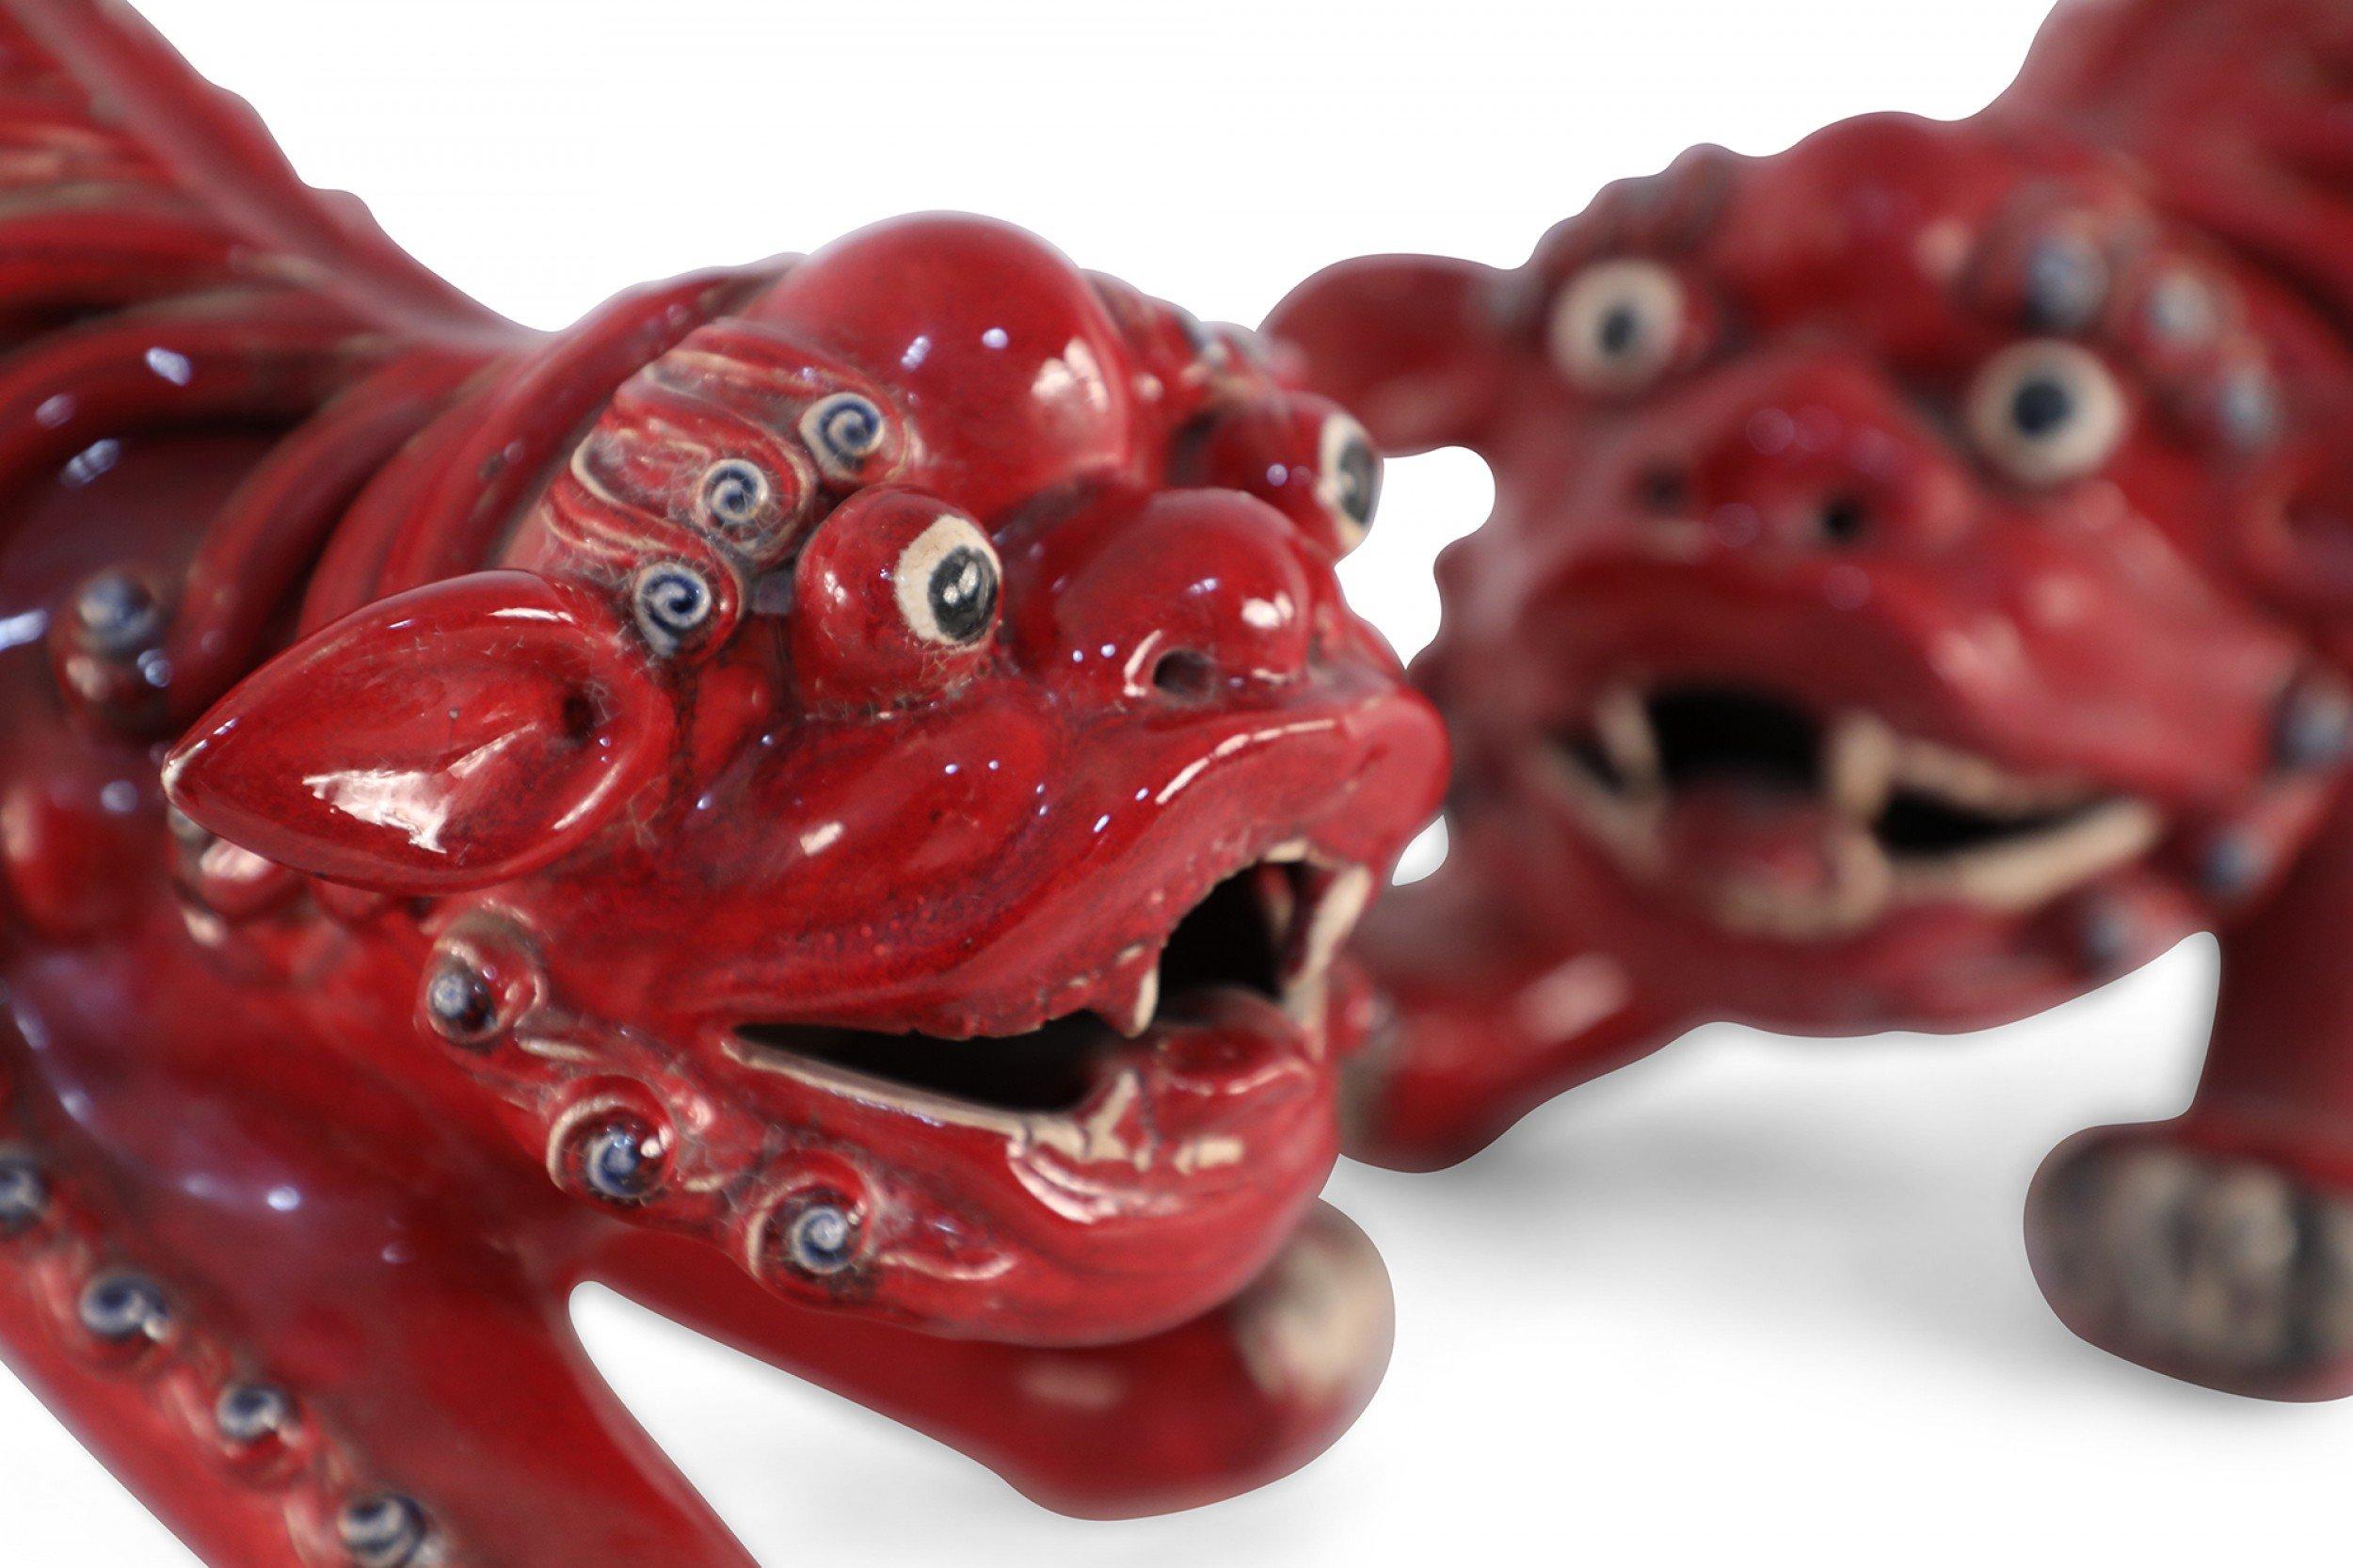 Pair of Chinese red porcelain foo dogs with spirited expressions, detailing, and shiwan town in guangdong forms- home to one of the most famous folk kilns during the ming and qing dynasties, renowned for their vivid animal models (priced as